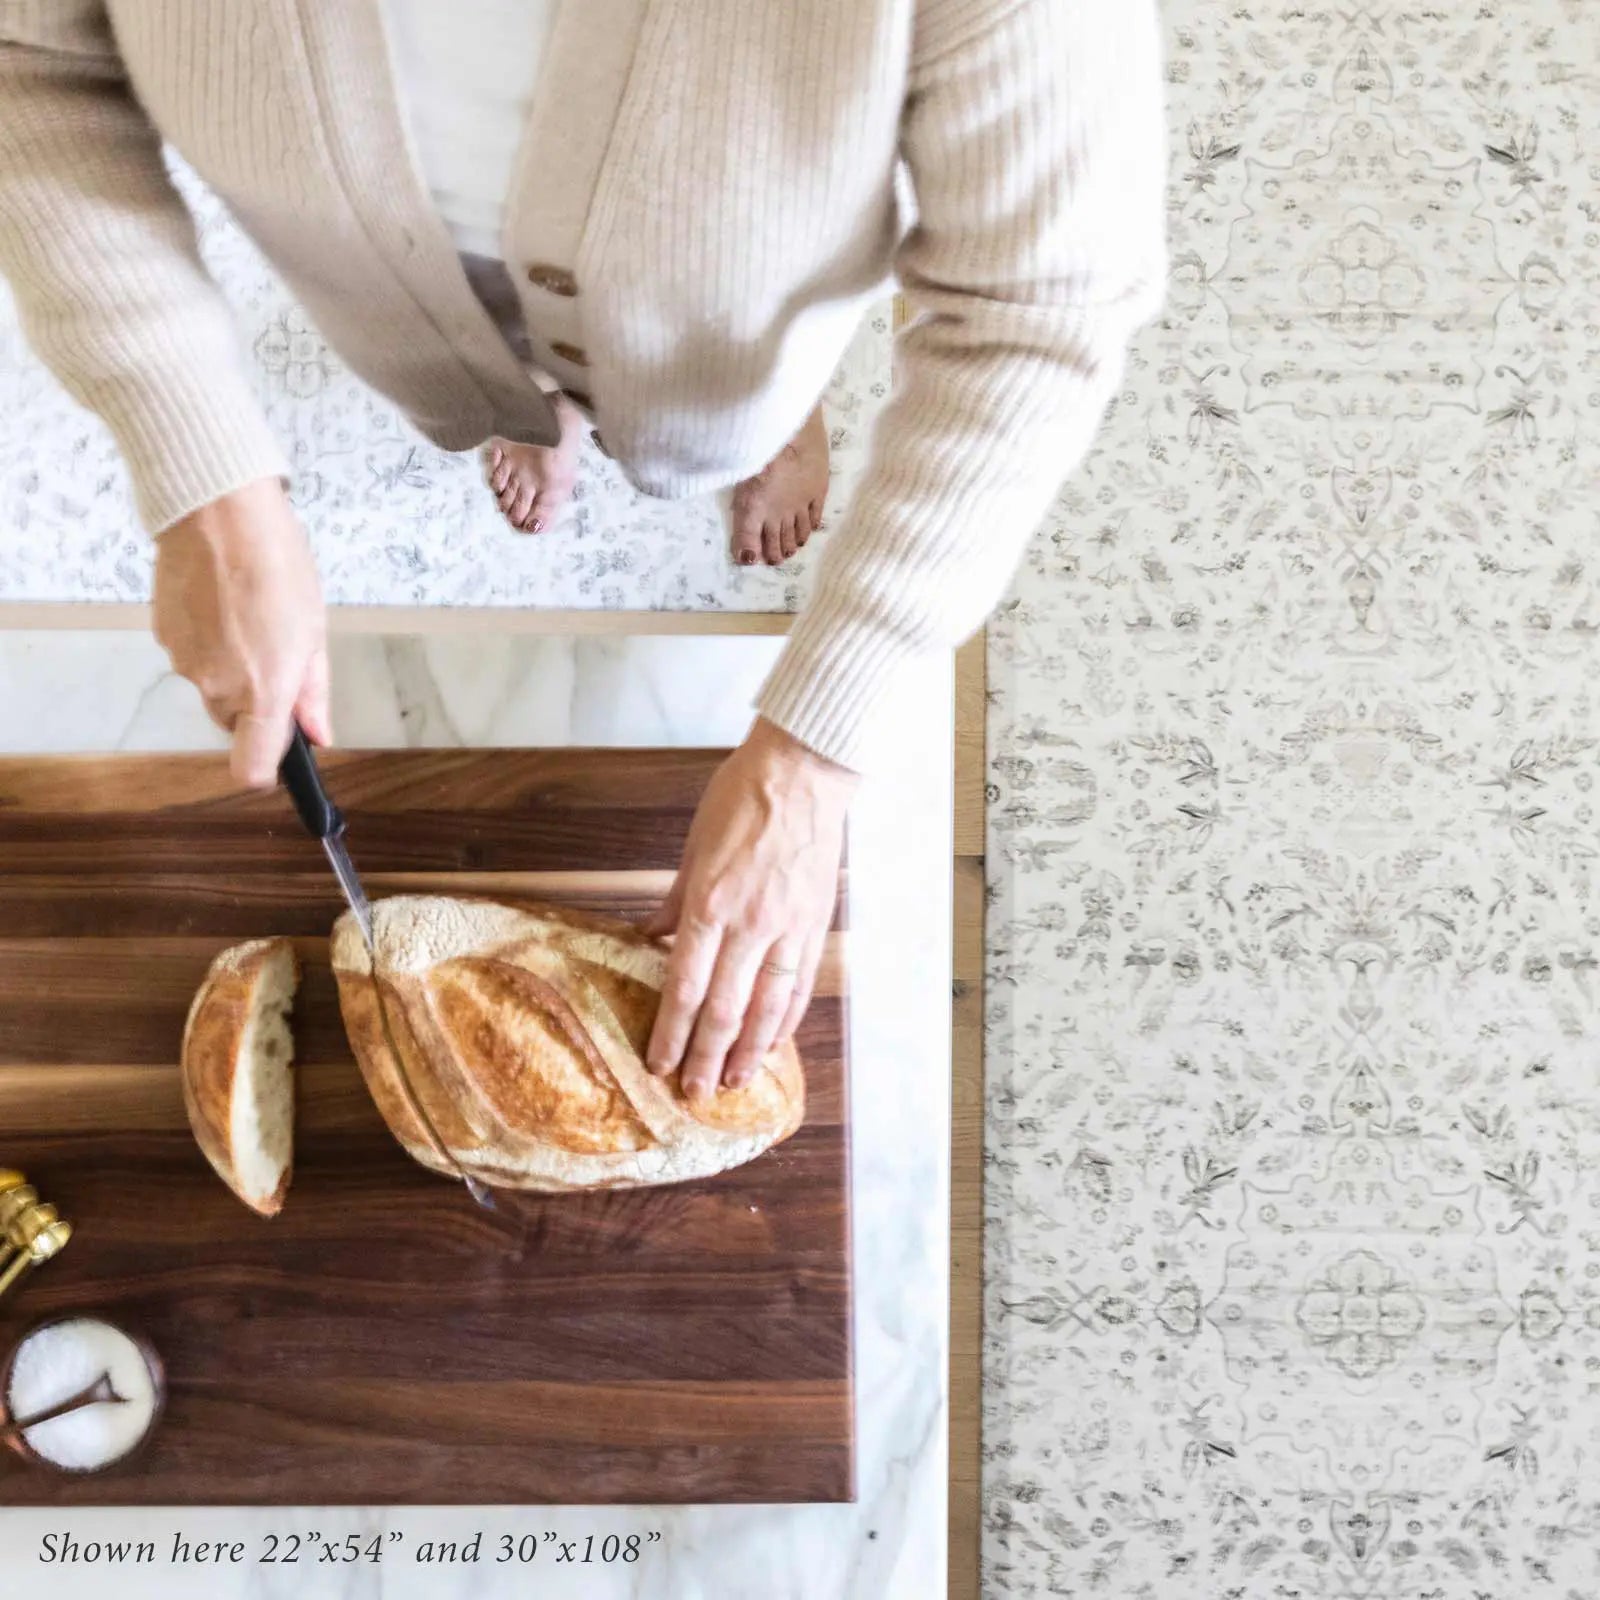 Emile latte beige and gray floral boho kitchen mat shown in sizes 22x54 and 30x108 with woman cutting a loaf of bread at kitchen counter